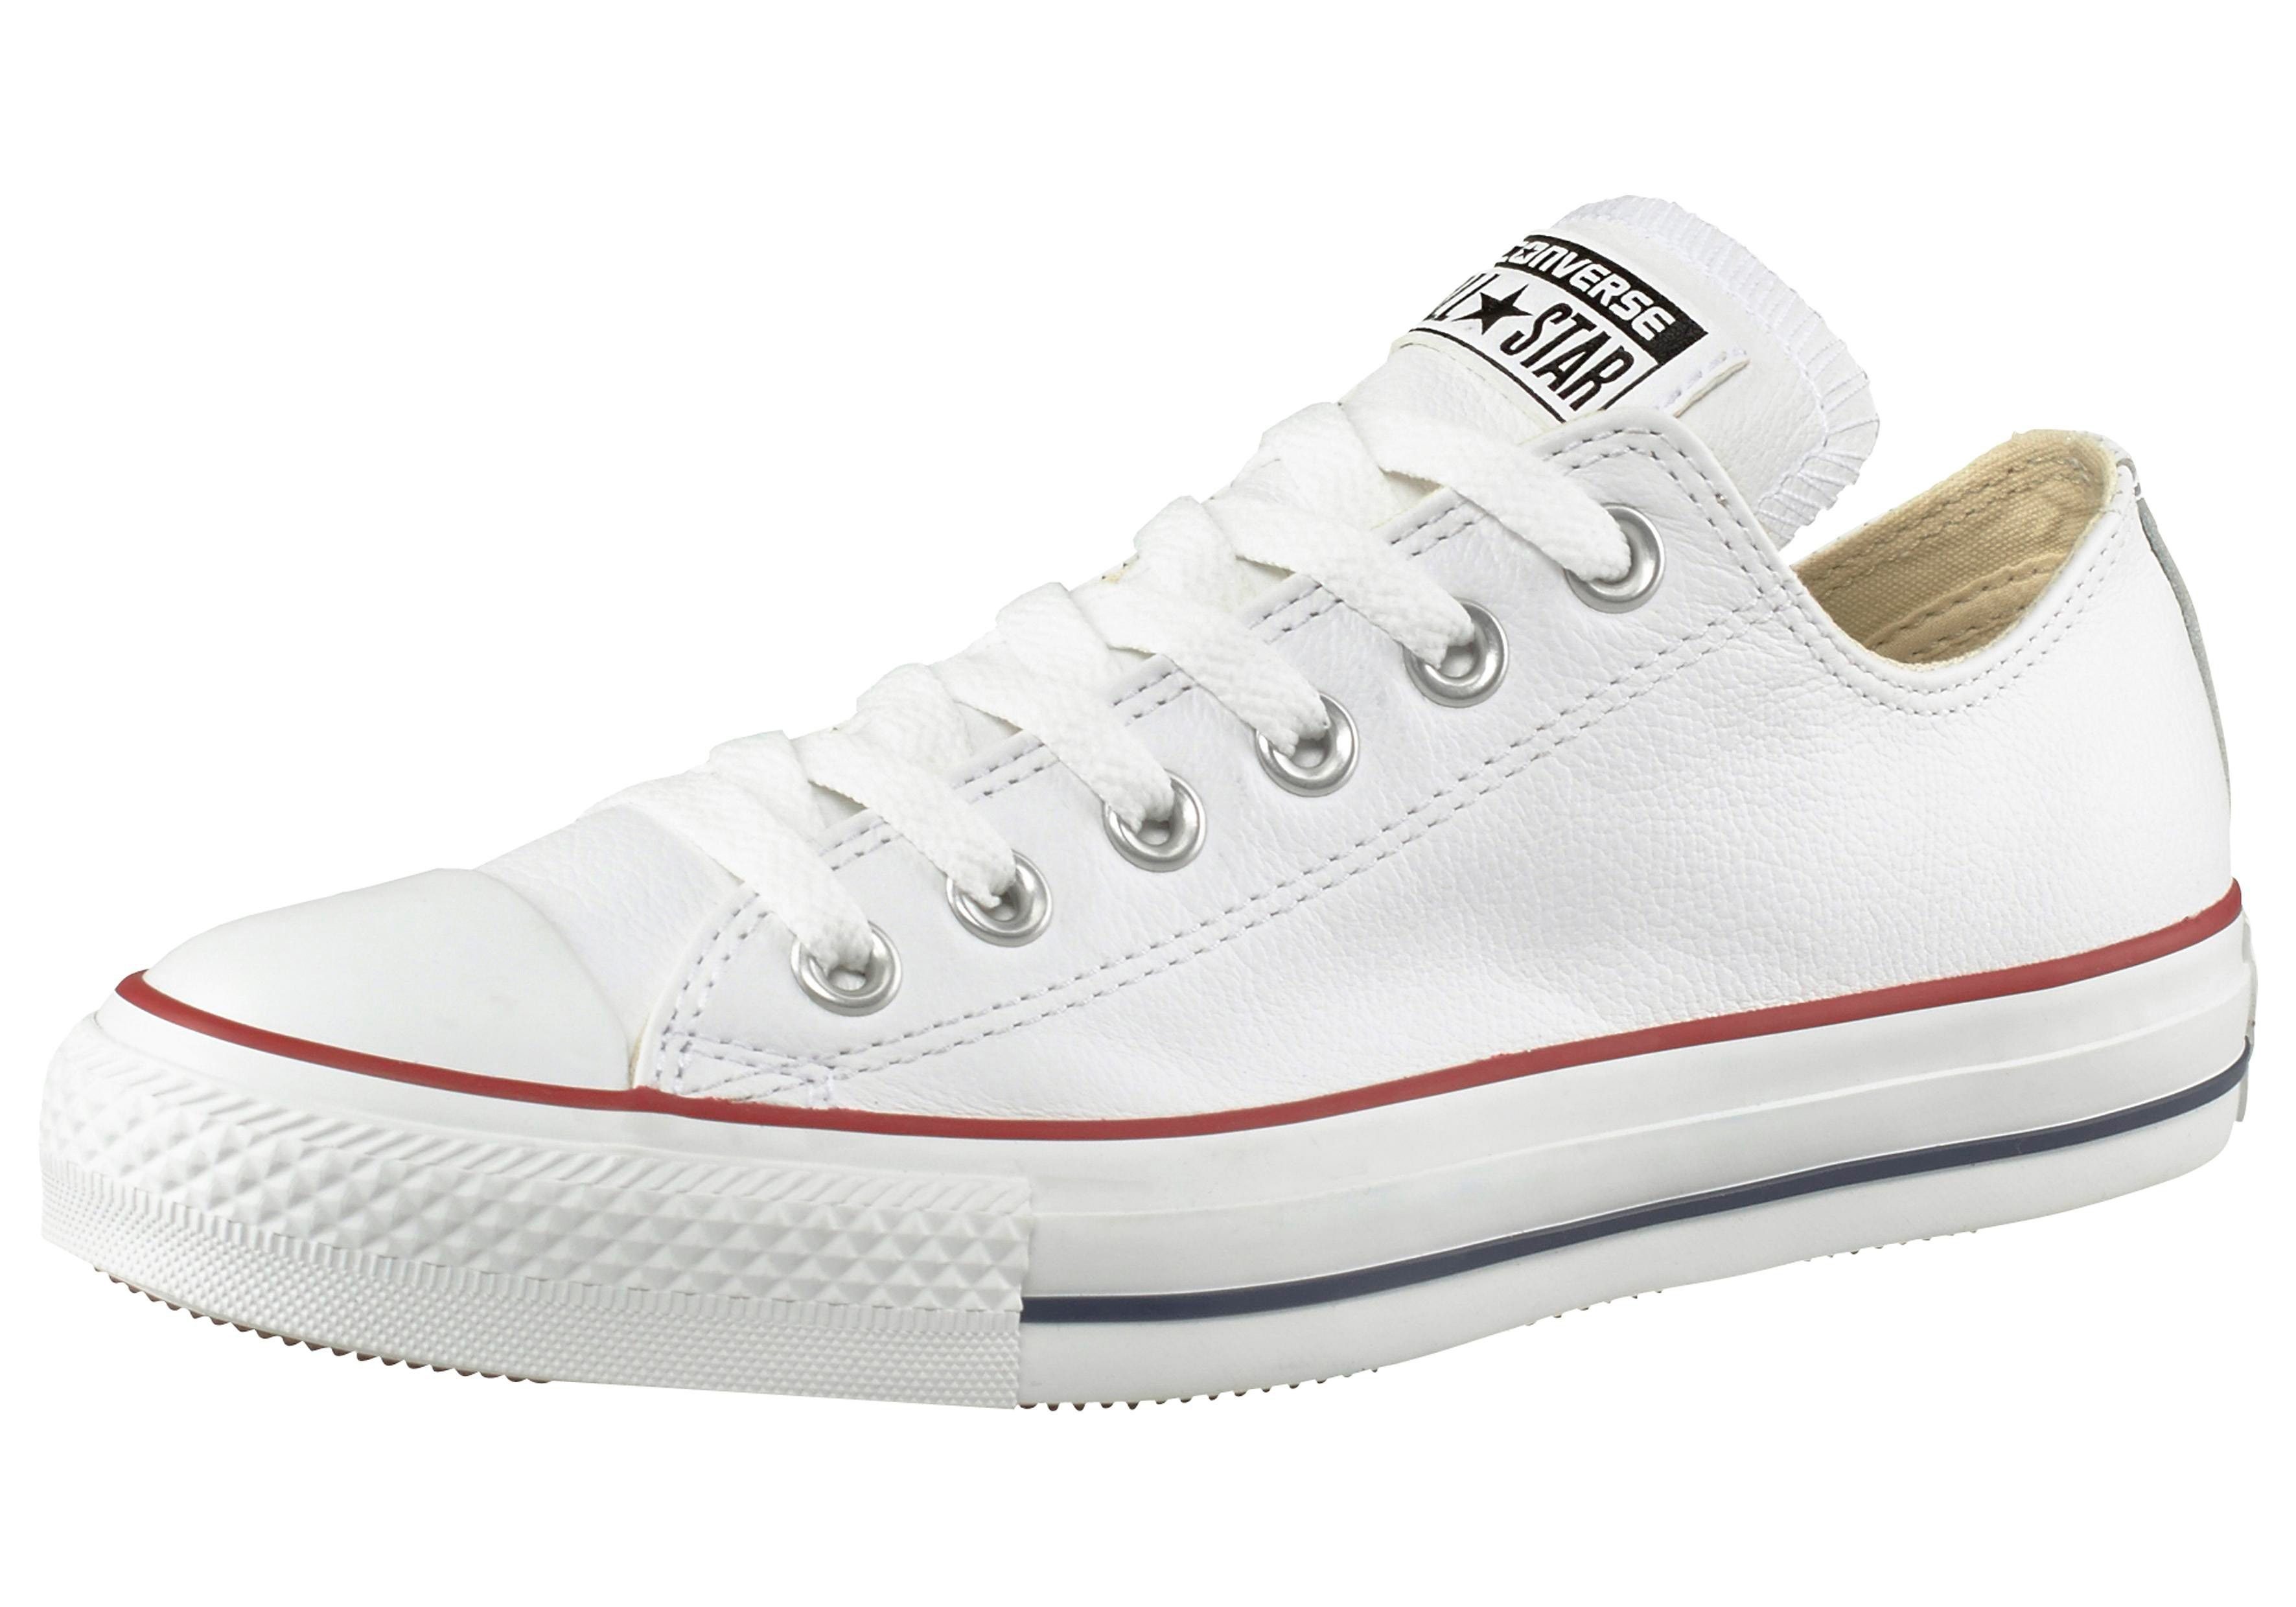 Converse Chuck Taylor All Star Basic Leather Ox Sneaker White